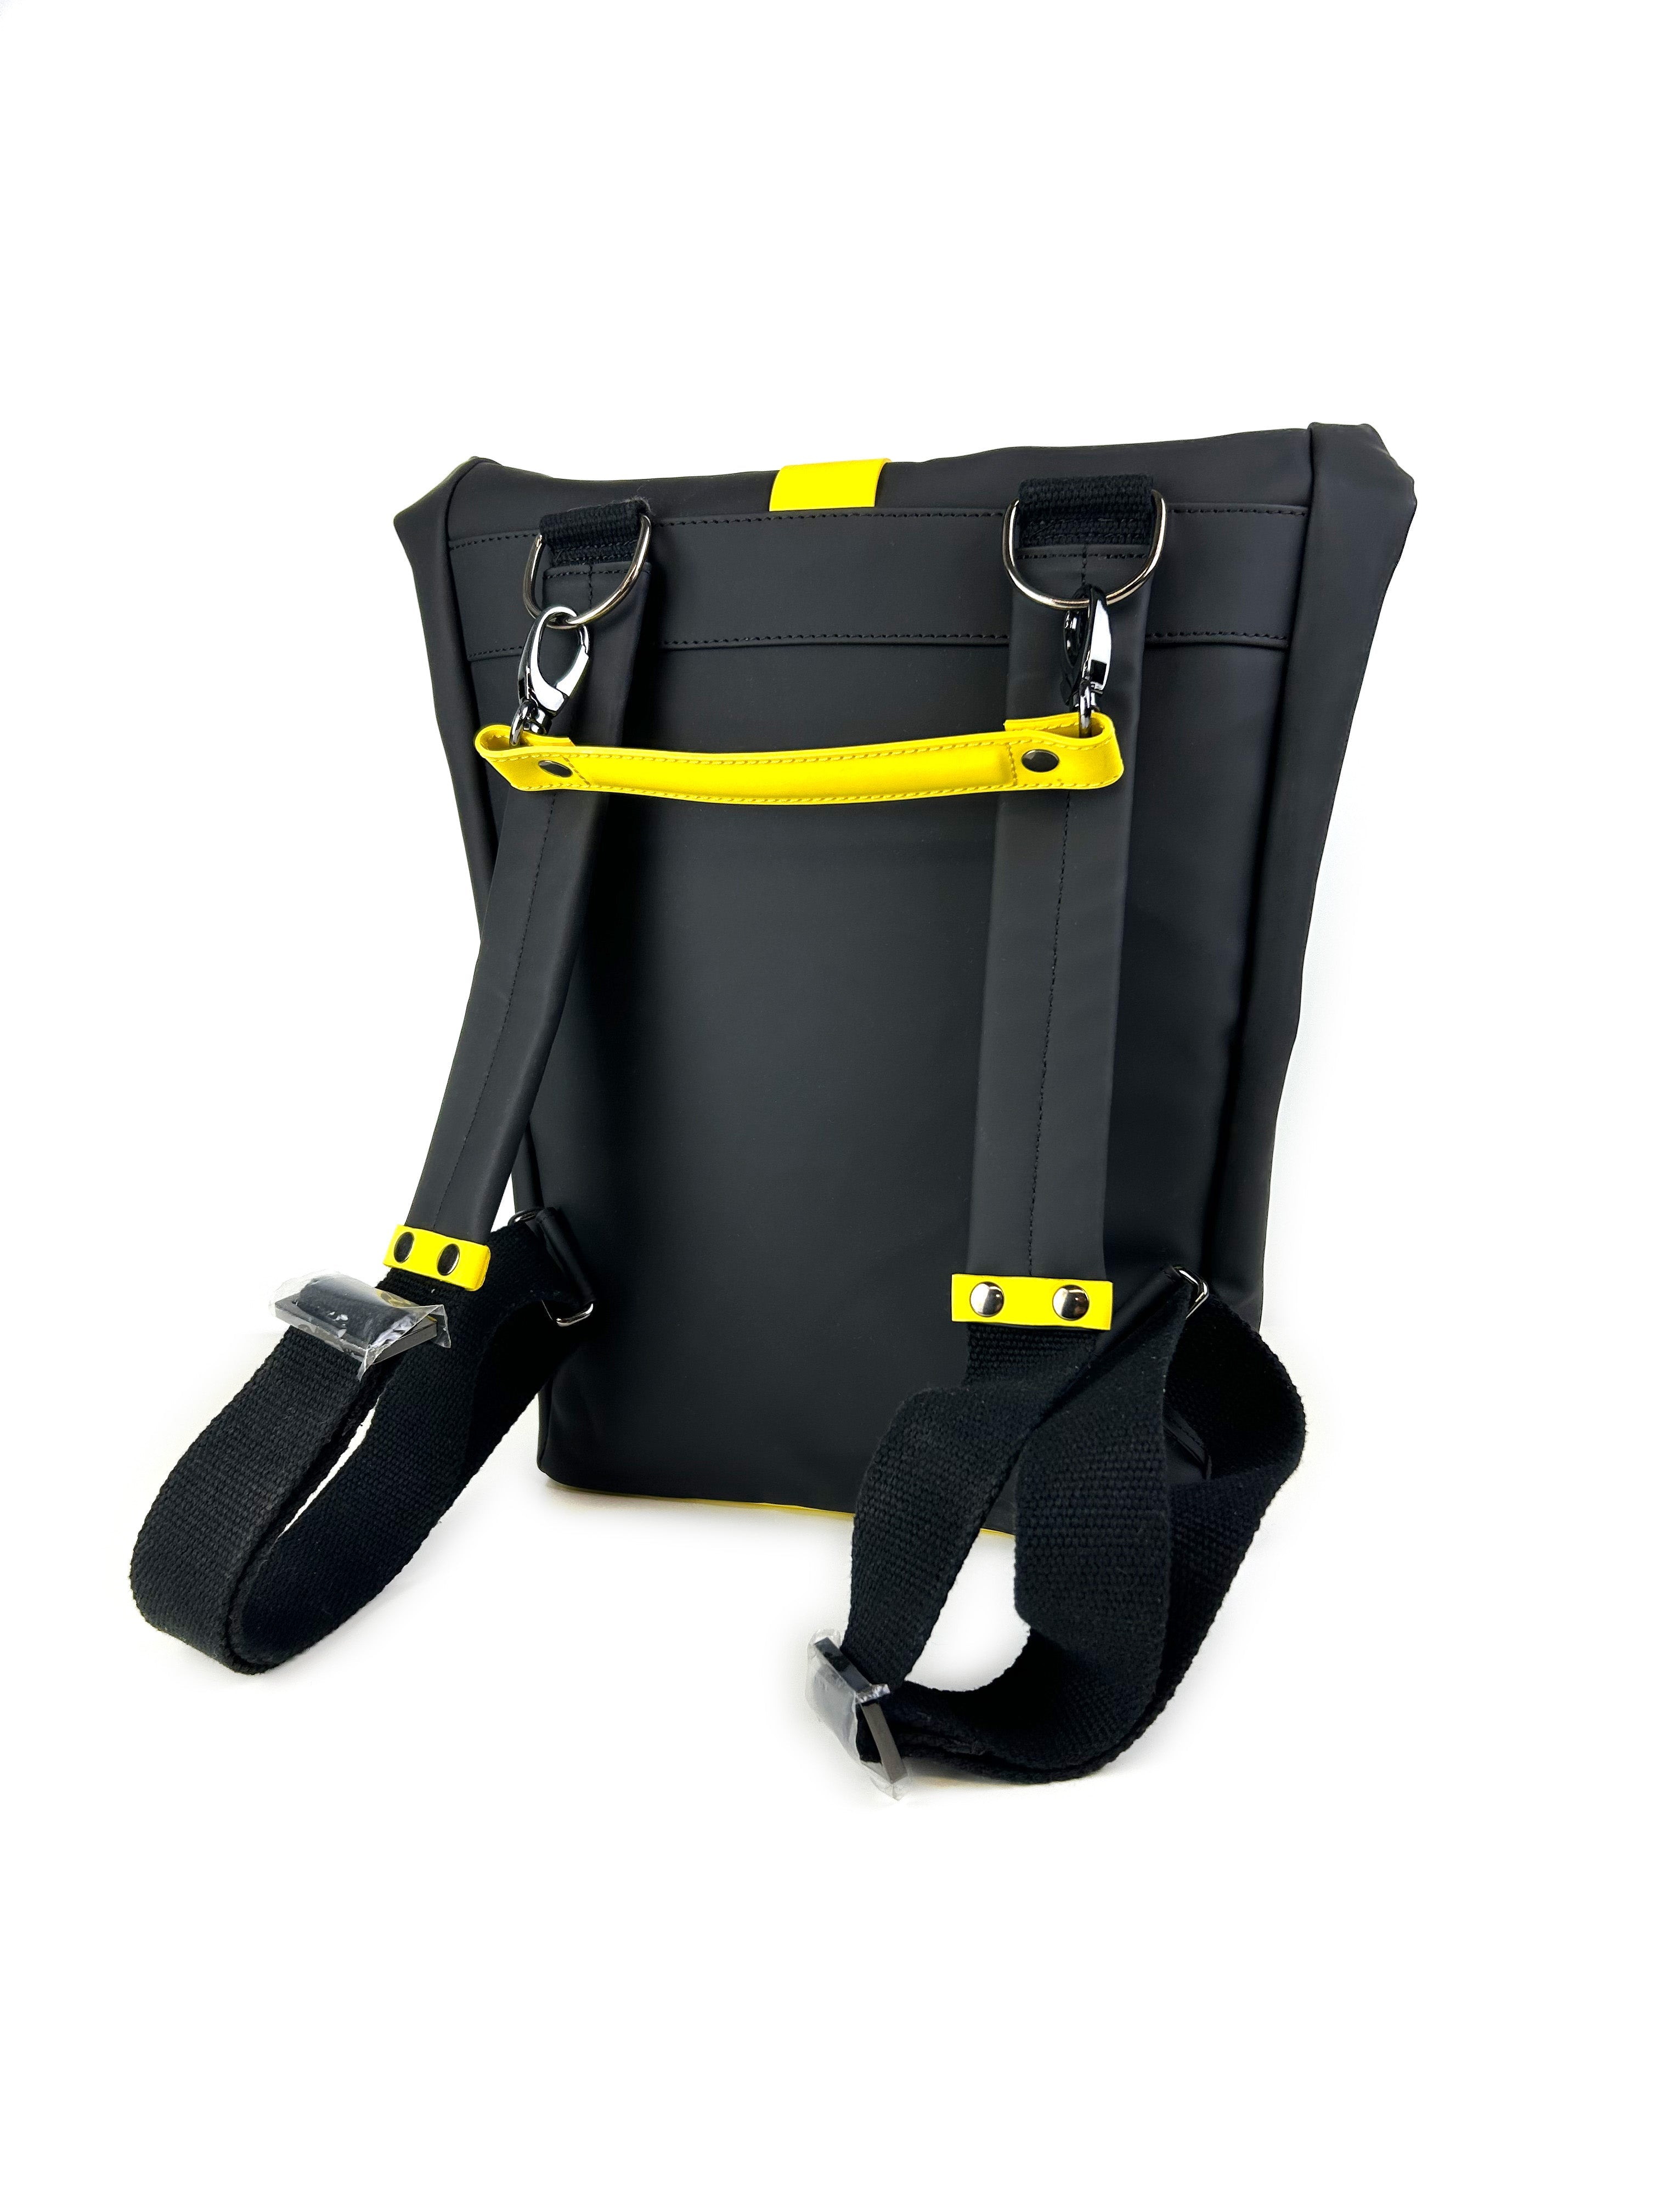 Reverse side of HADLEY Waterproof Backpack in black showing padded leather shoulder straps and contrasting yellow details 